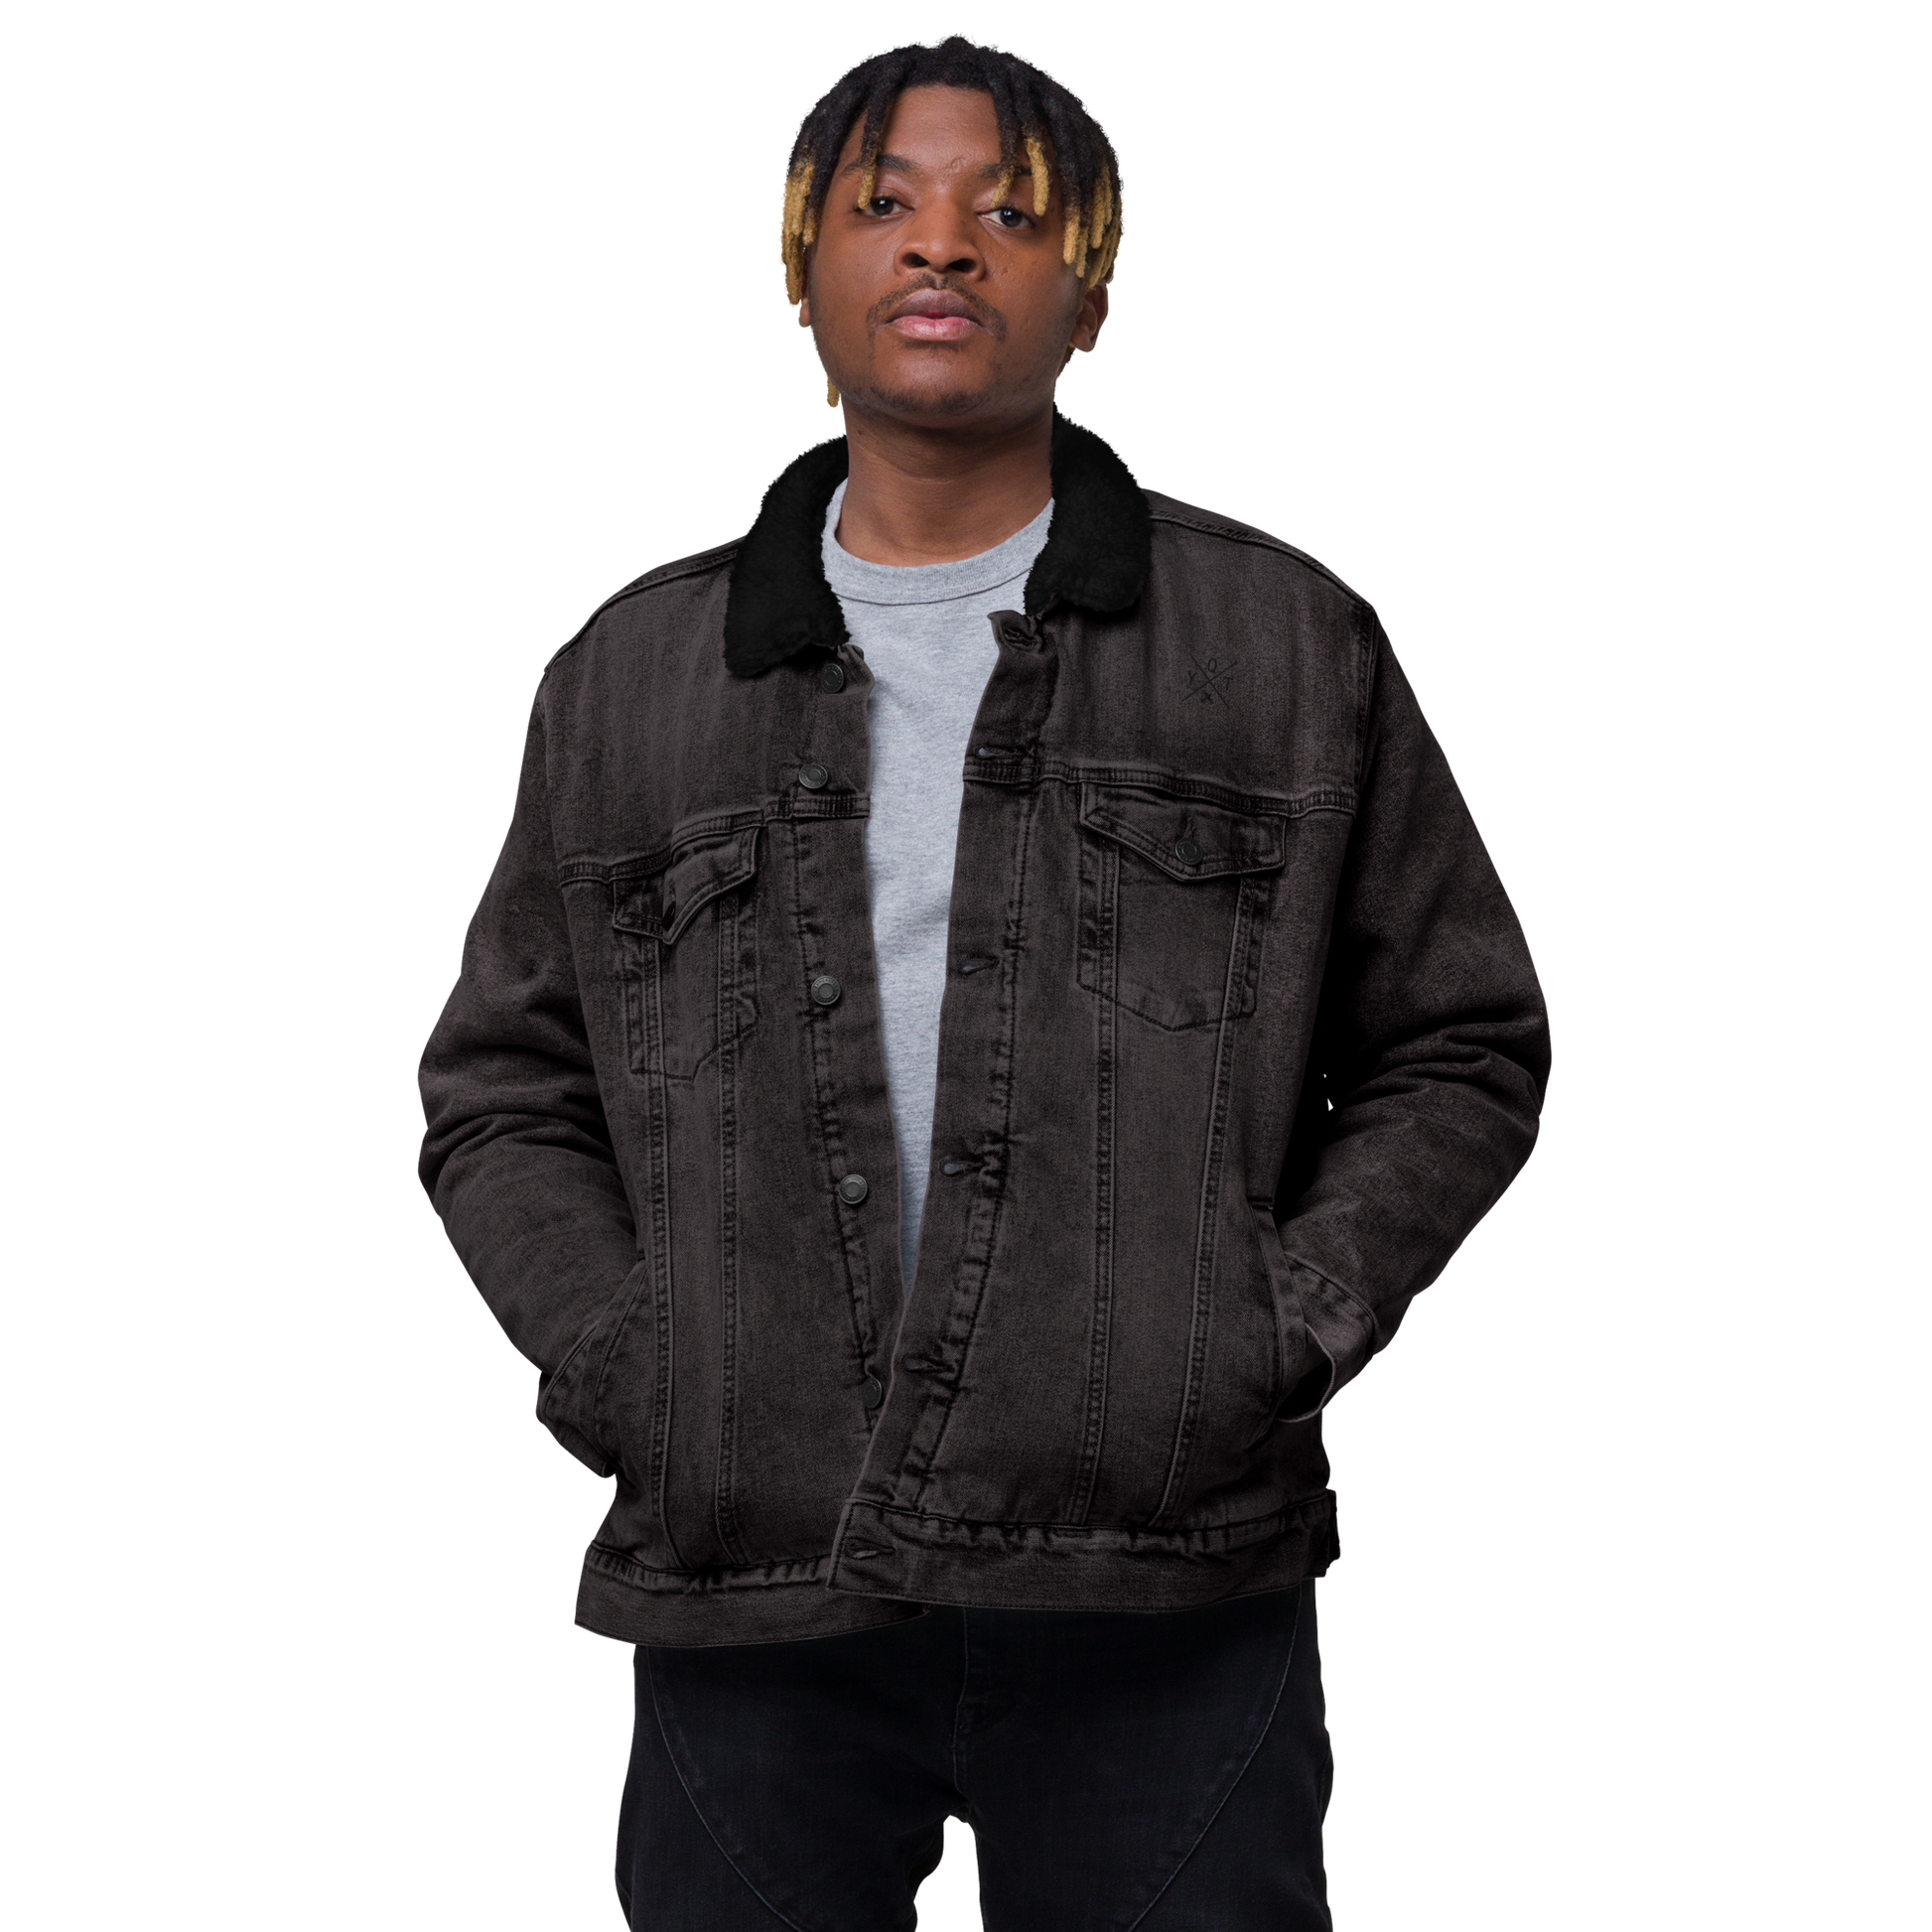 YHM Designs - YQT Thunder Bay Denim Sherpa Jacket - Crossed-X Design with Airport Code and Vintage Propliner - Black & White Embroidery - Image 01